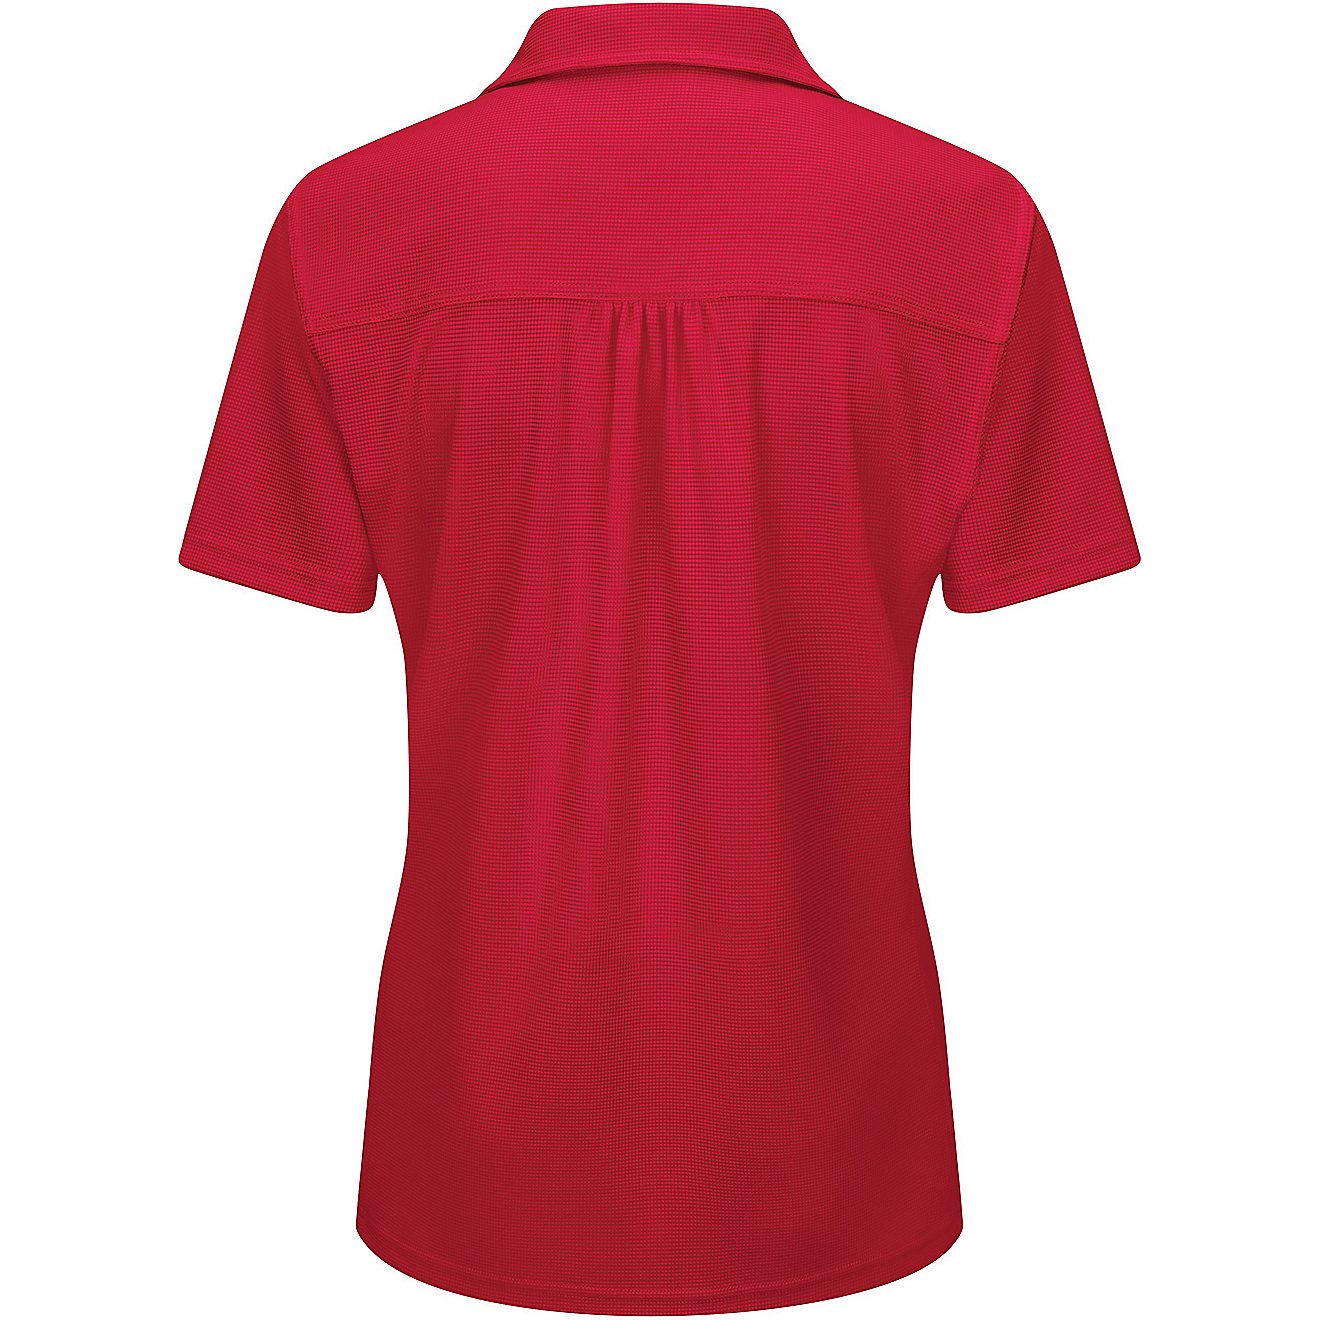 Red Kap Women's Performance Knit Flex Series Pro Polo                                                                            - view number 3